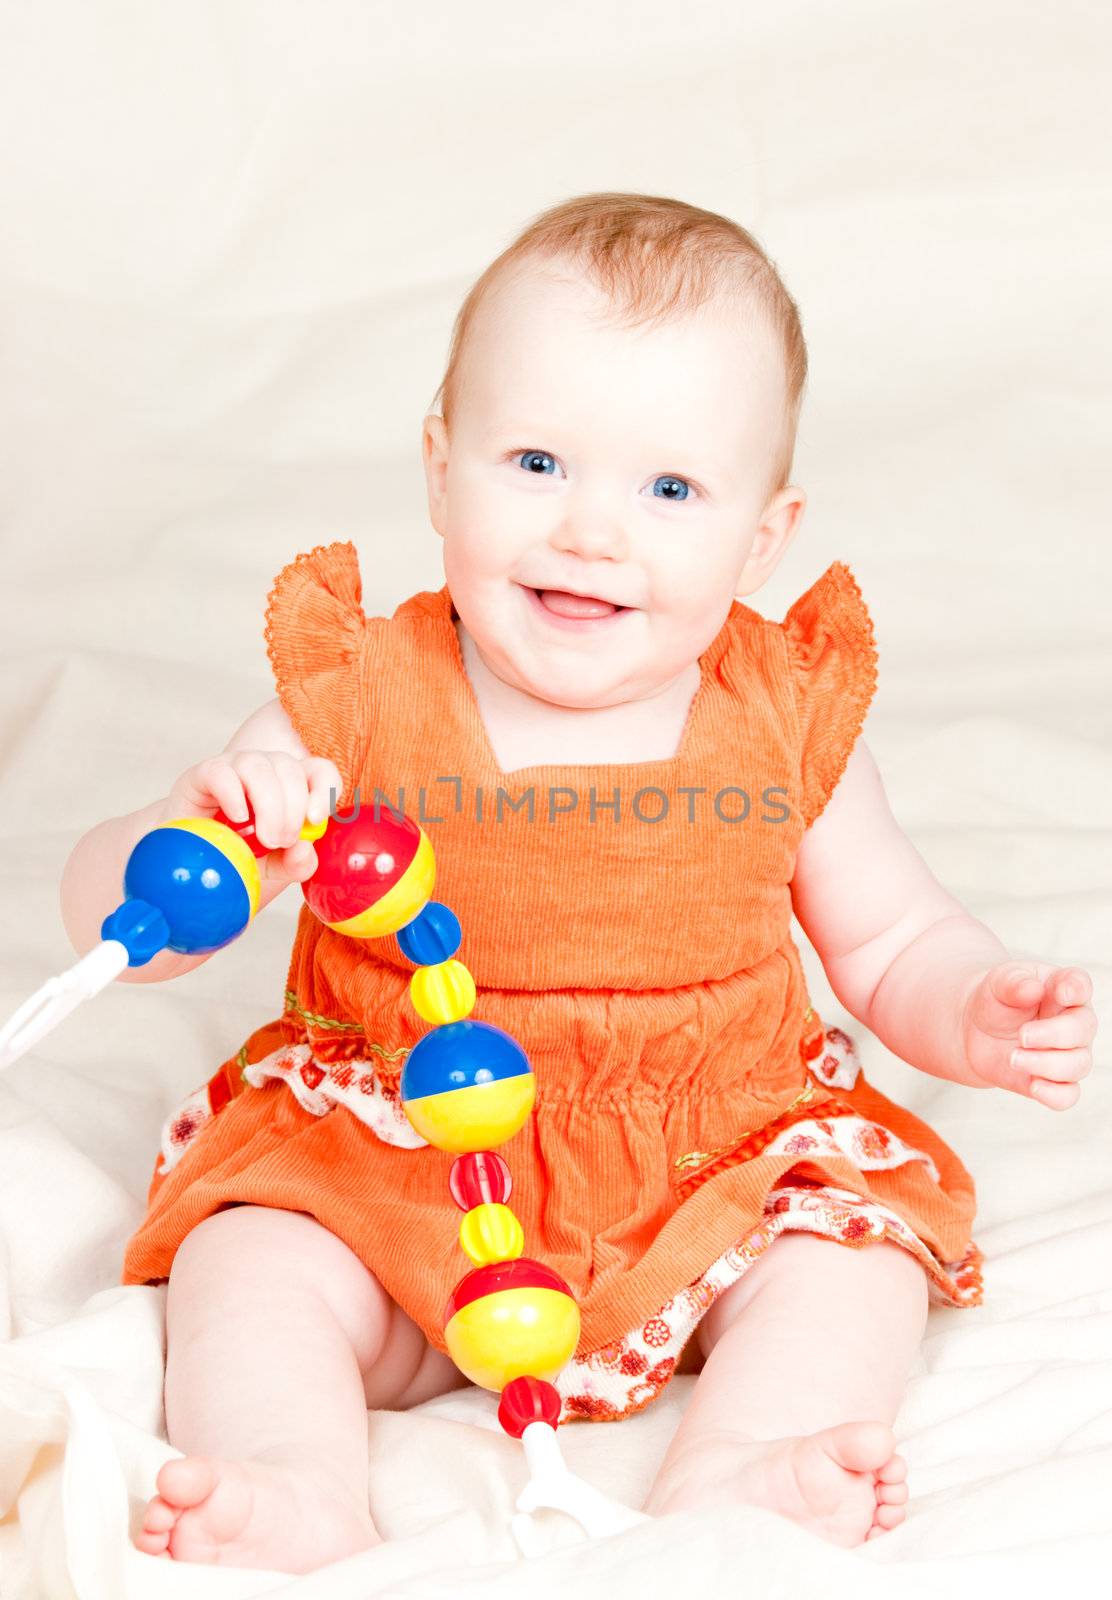 Little baby girl playing with rattle